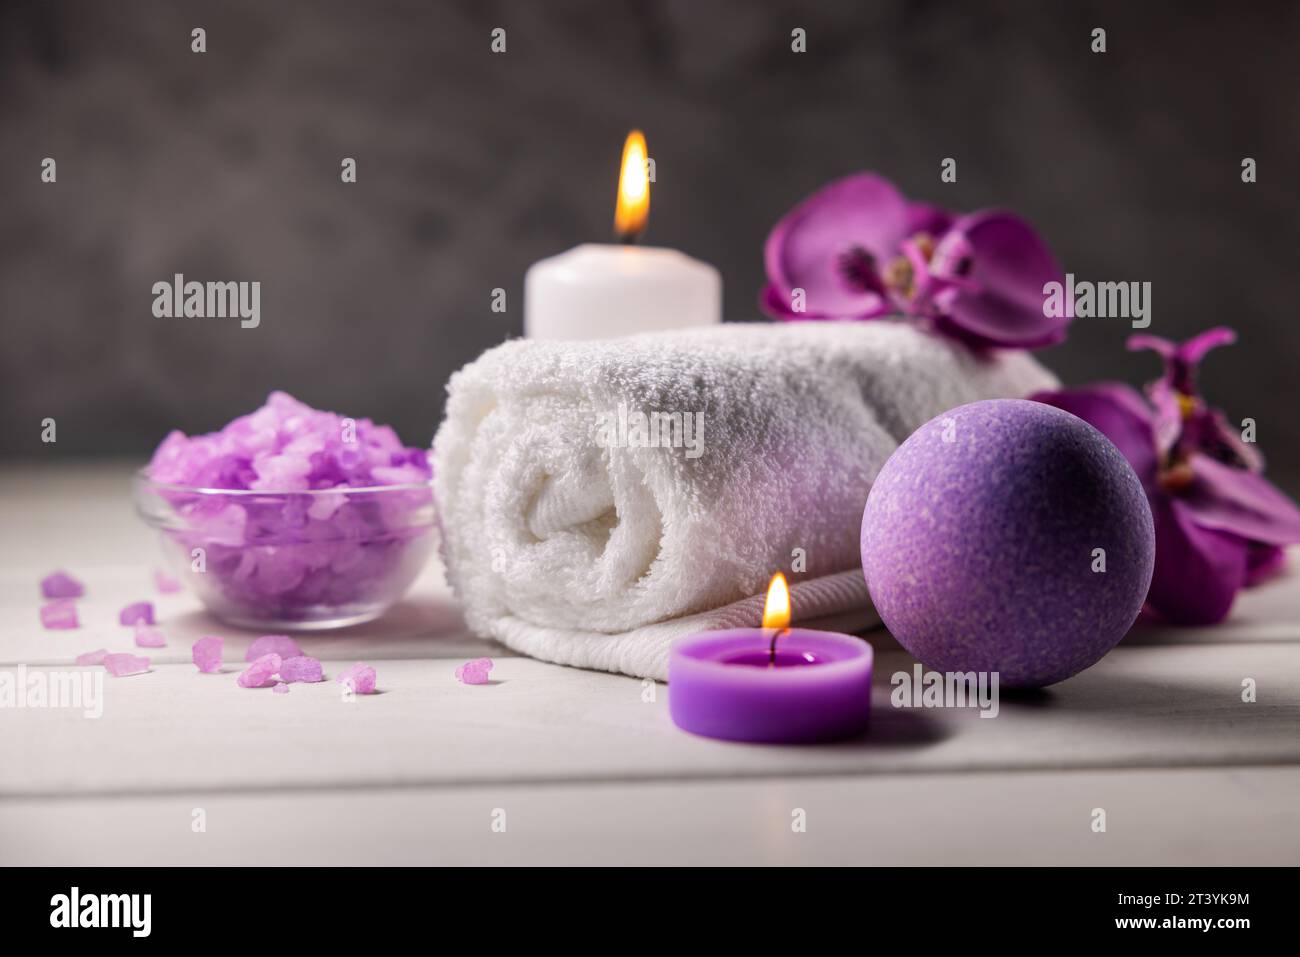 purple bath bomb, sea salt crystals, towel and scented candles on wooden table. body skin care. wellness spa Stock Photo